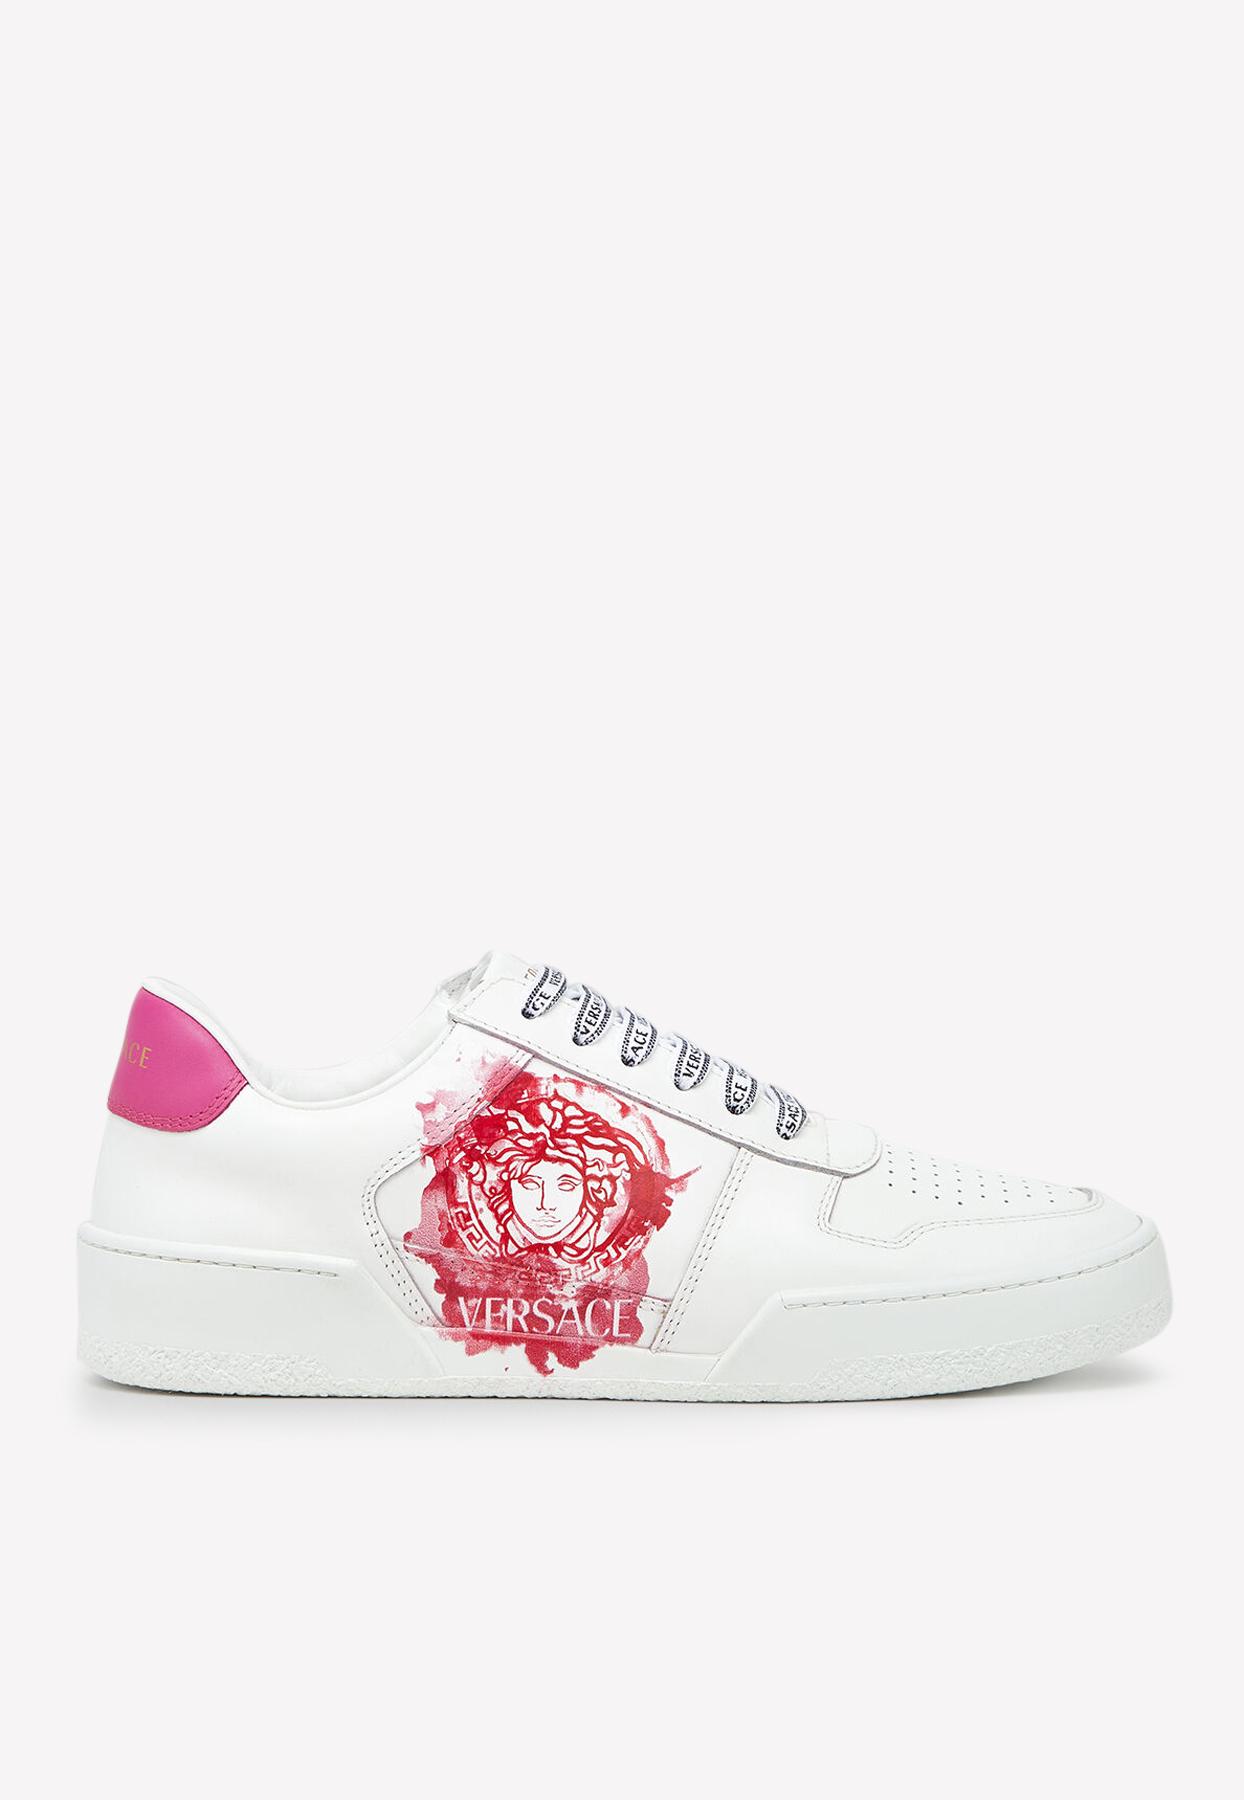 Versace Ilus Medusa Print Sneakers In Leather in White | Lyst